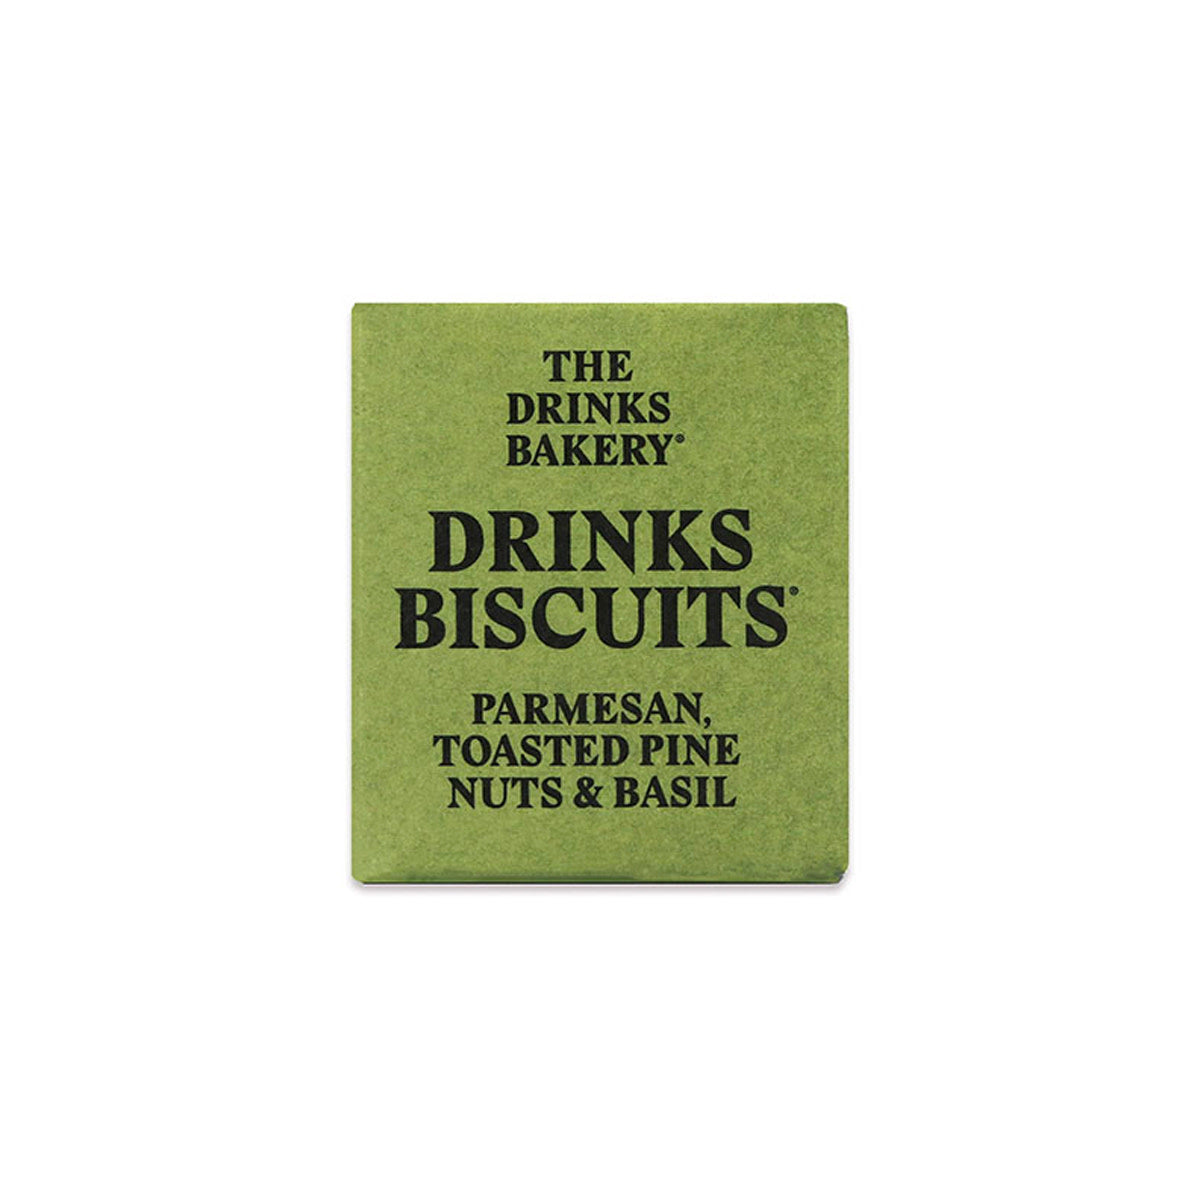 Parmesan, Toasted Pine Nuts & Basil Drinks Biscuits